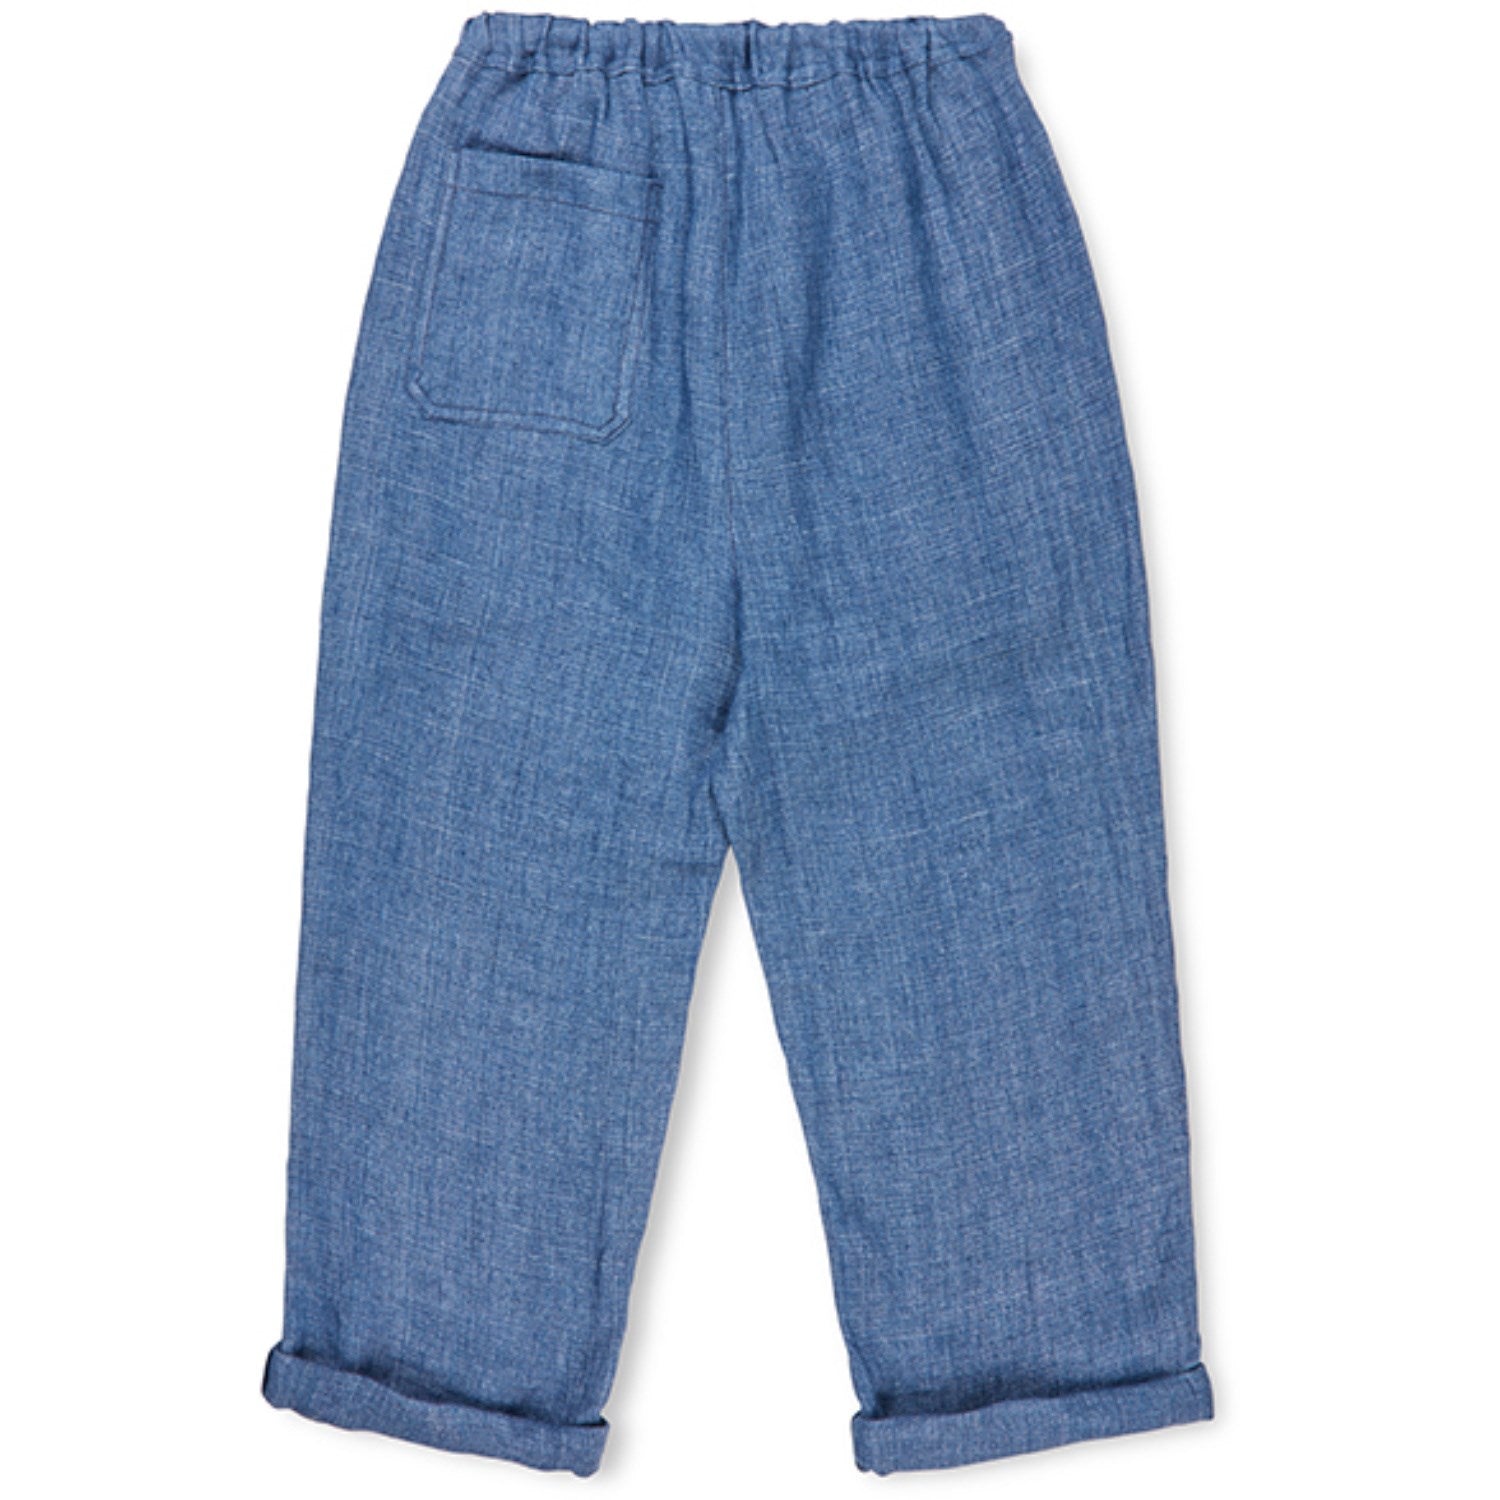 Lalaby Denim Blue Axel Trousers - Denim Blue 5